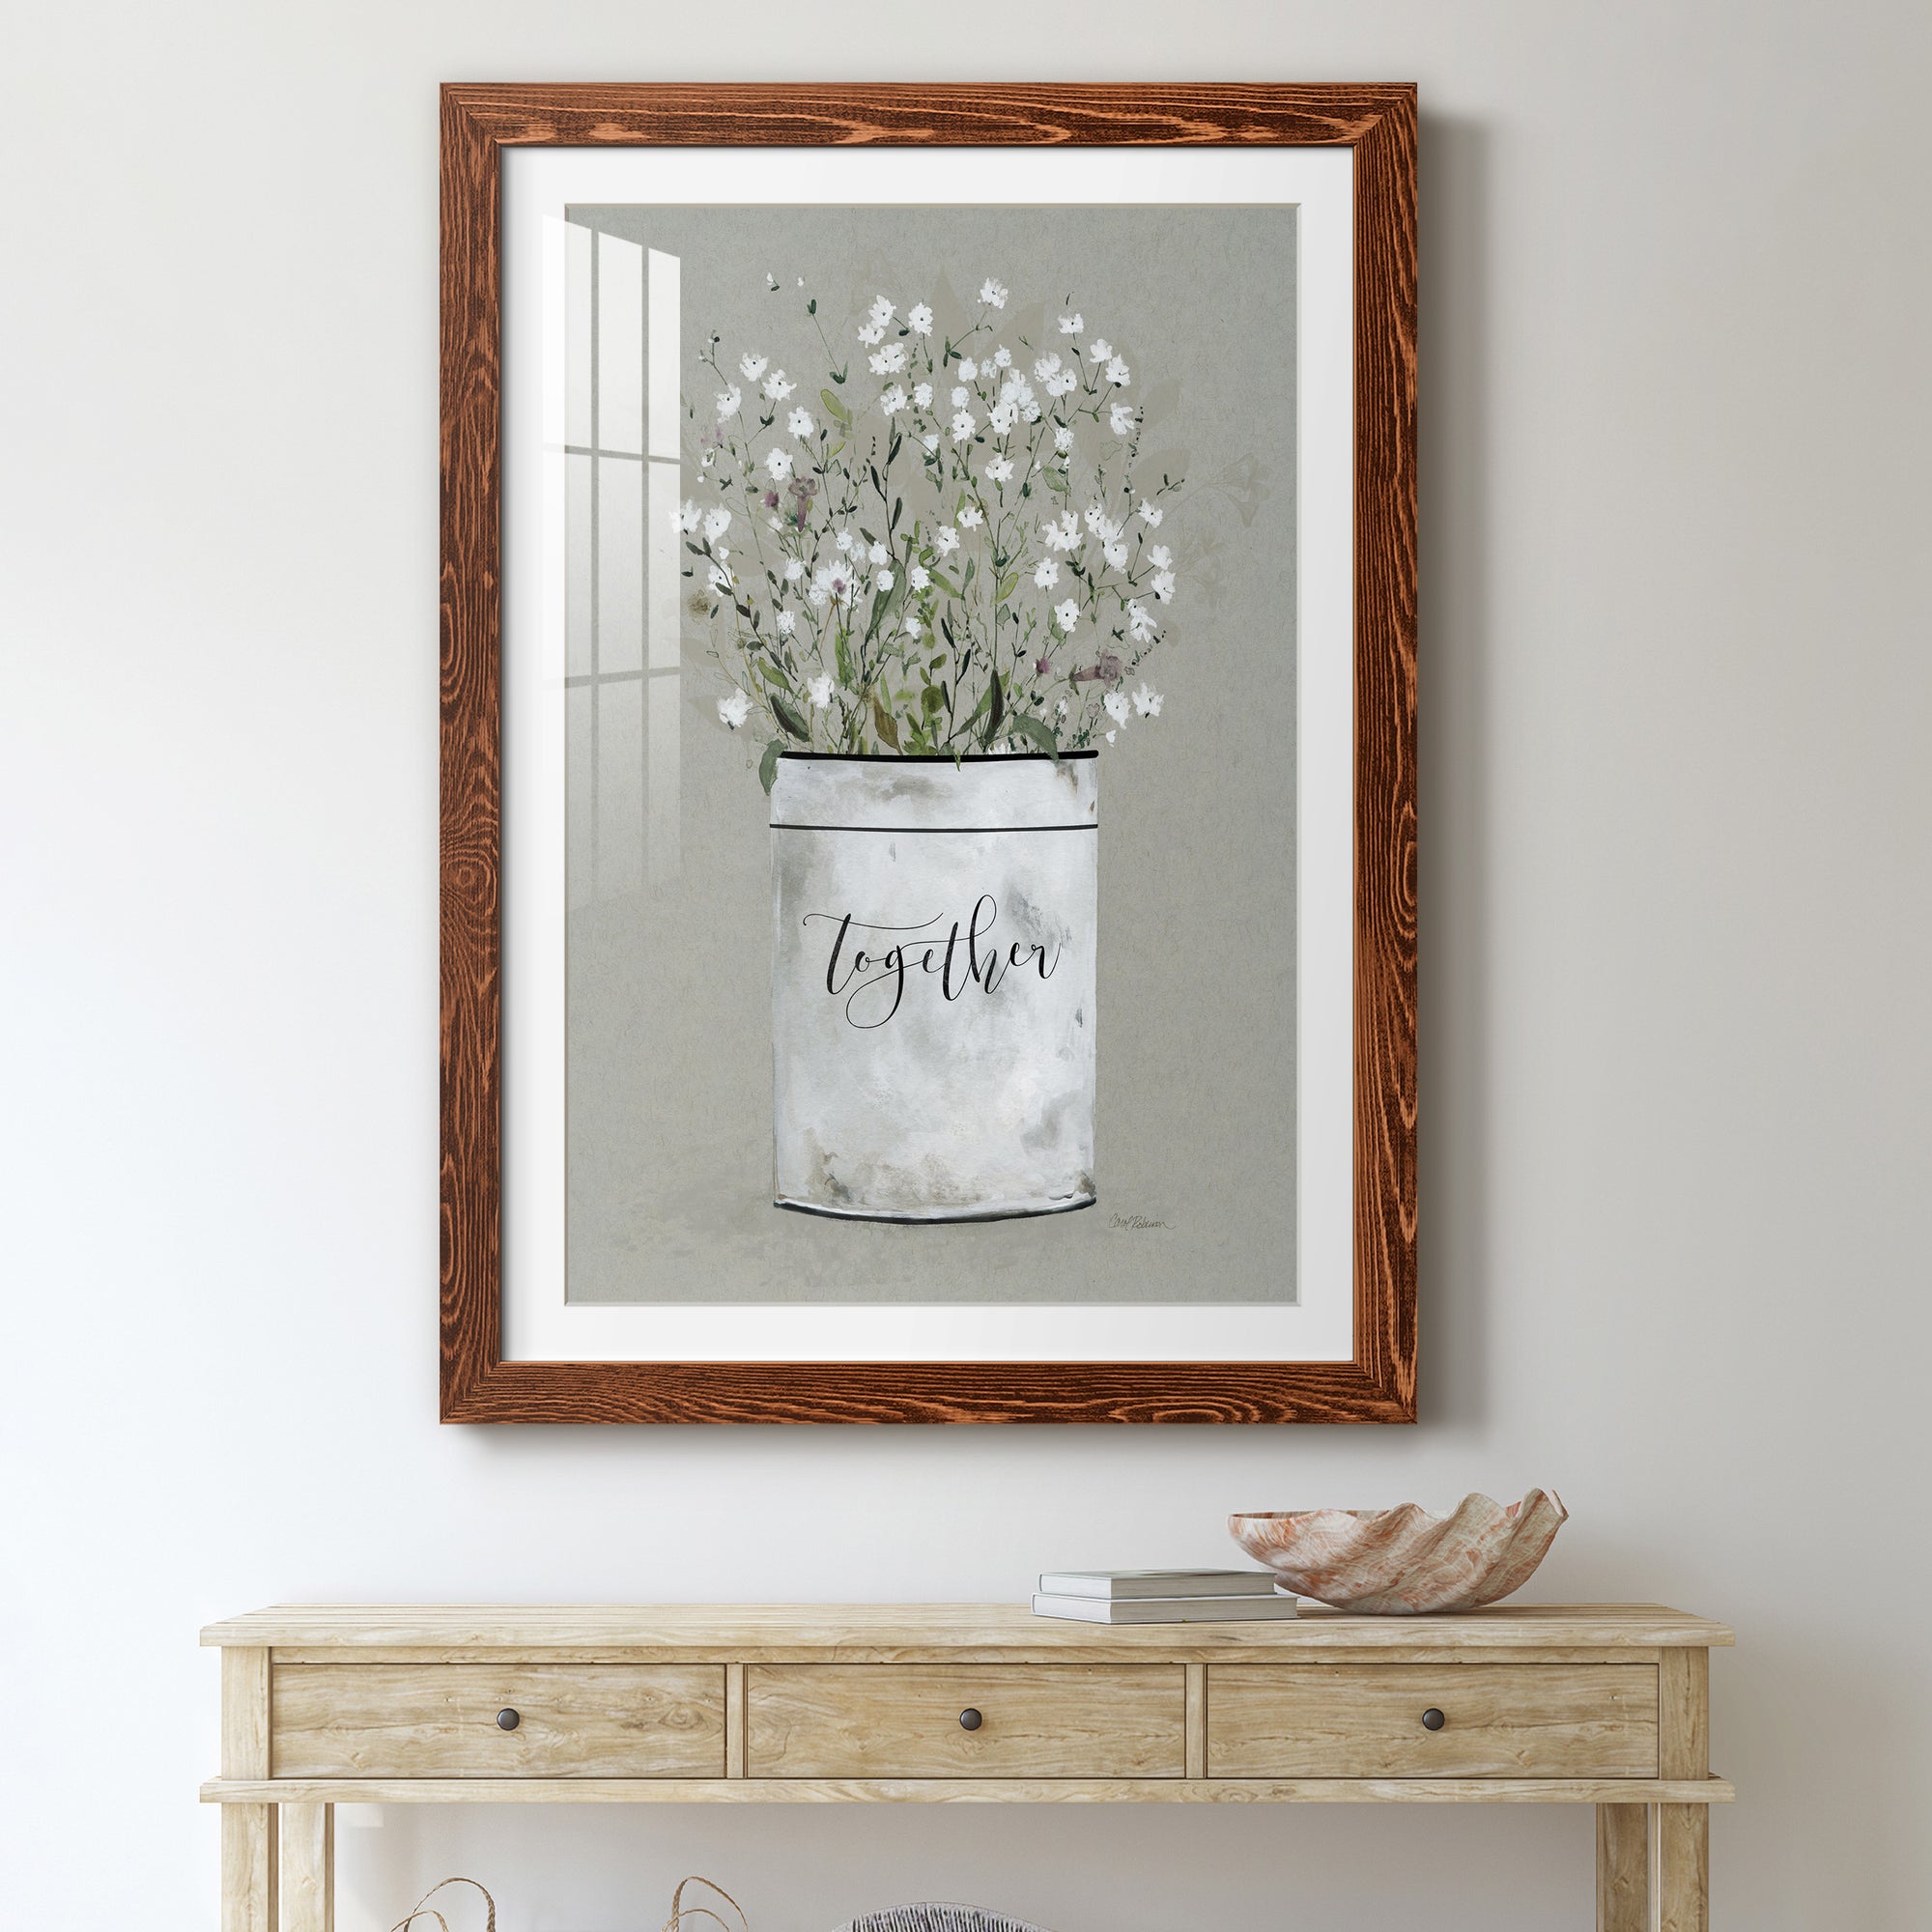 Bouquet of Grace Bucket Together - Premium Framed Print - Distressed Barnwood Frame - Ready to Hang